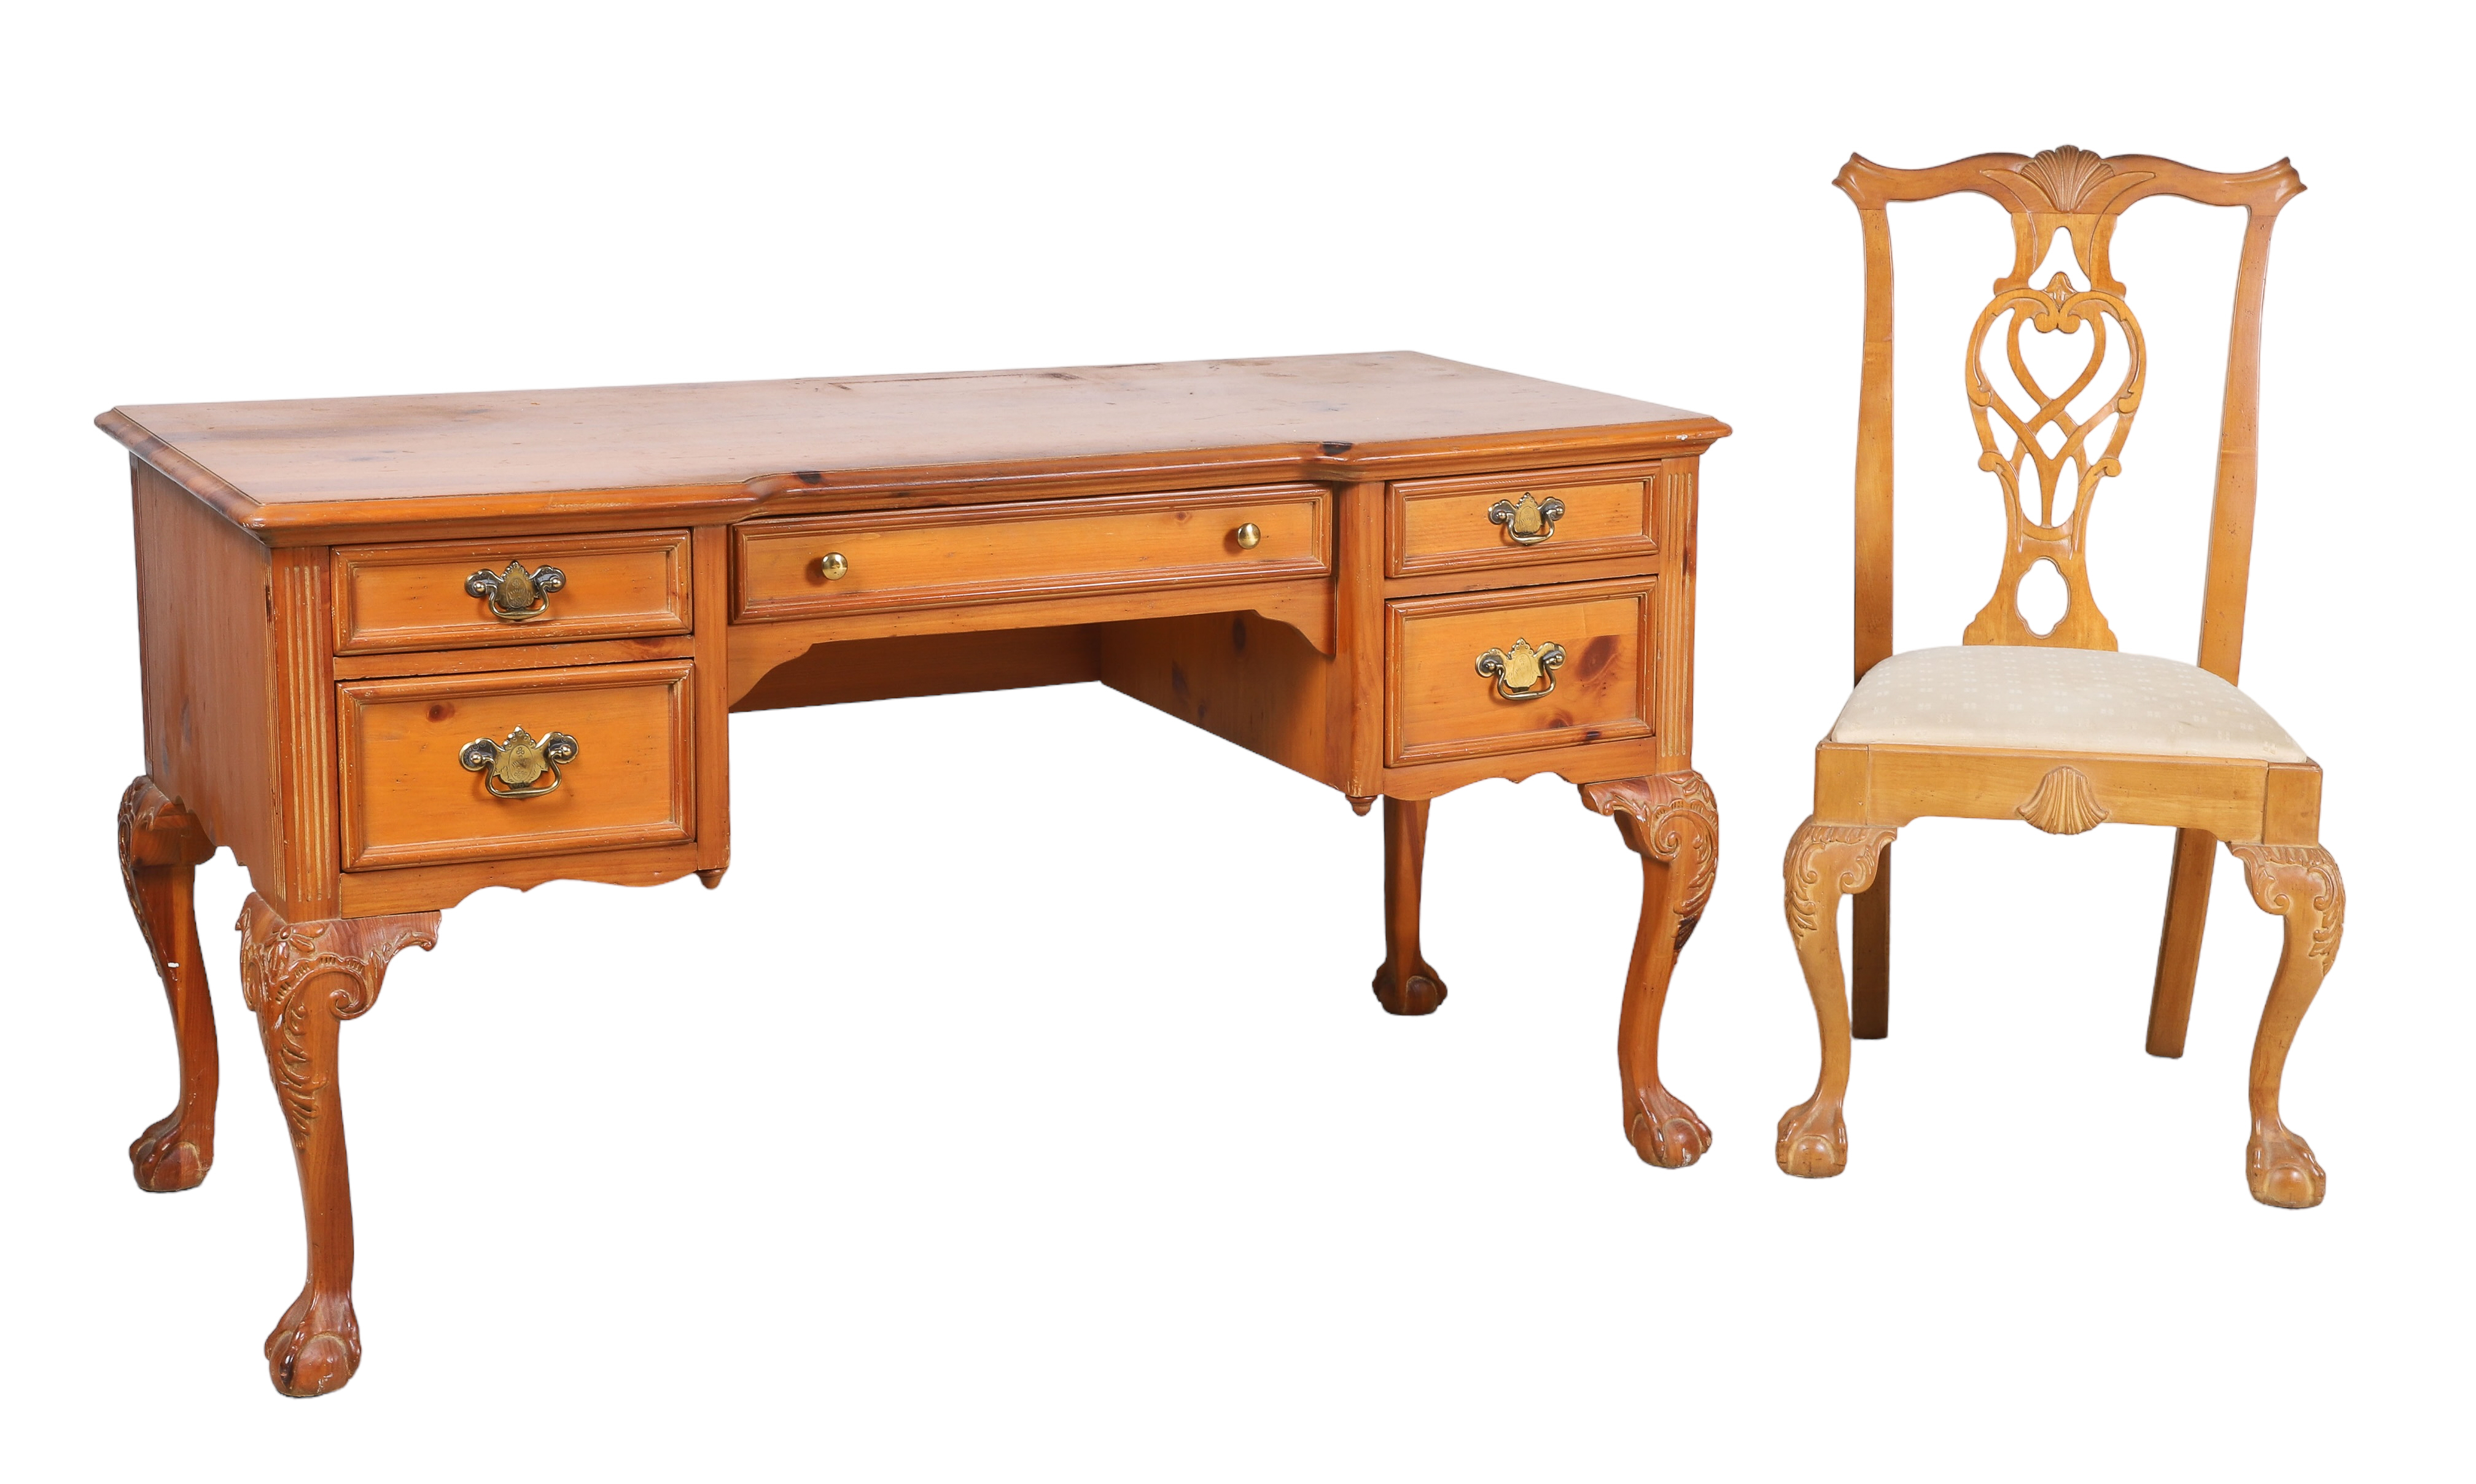 Chippendale style pine desk w/